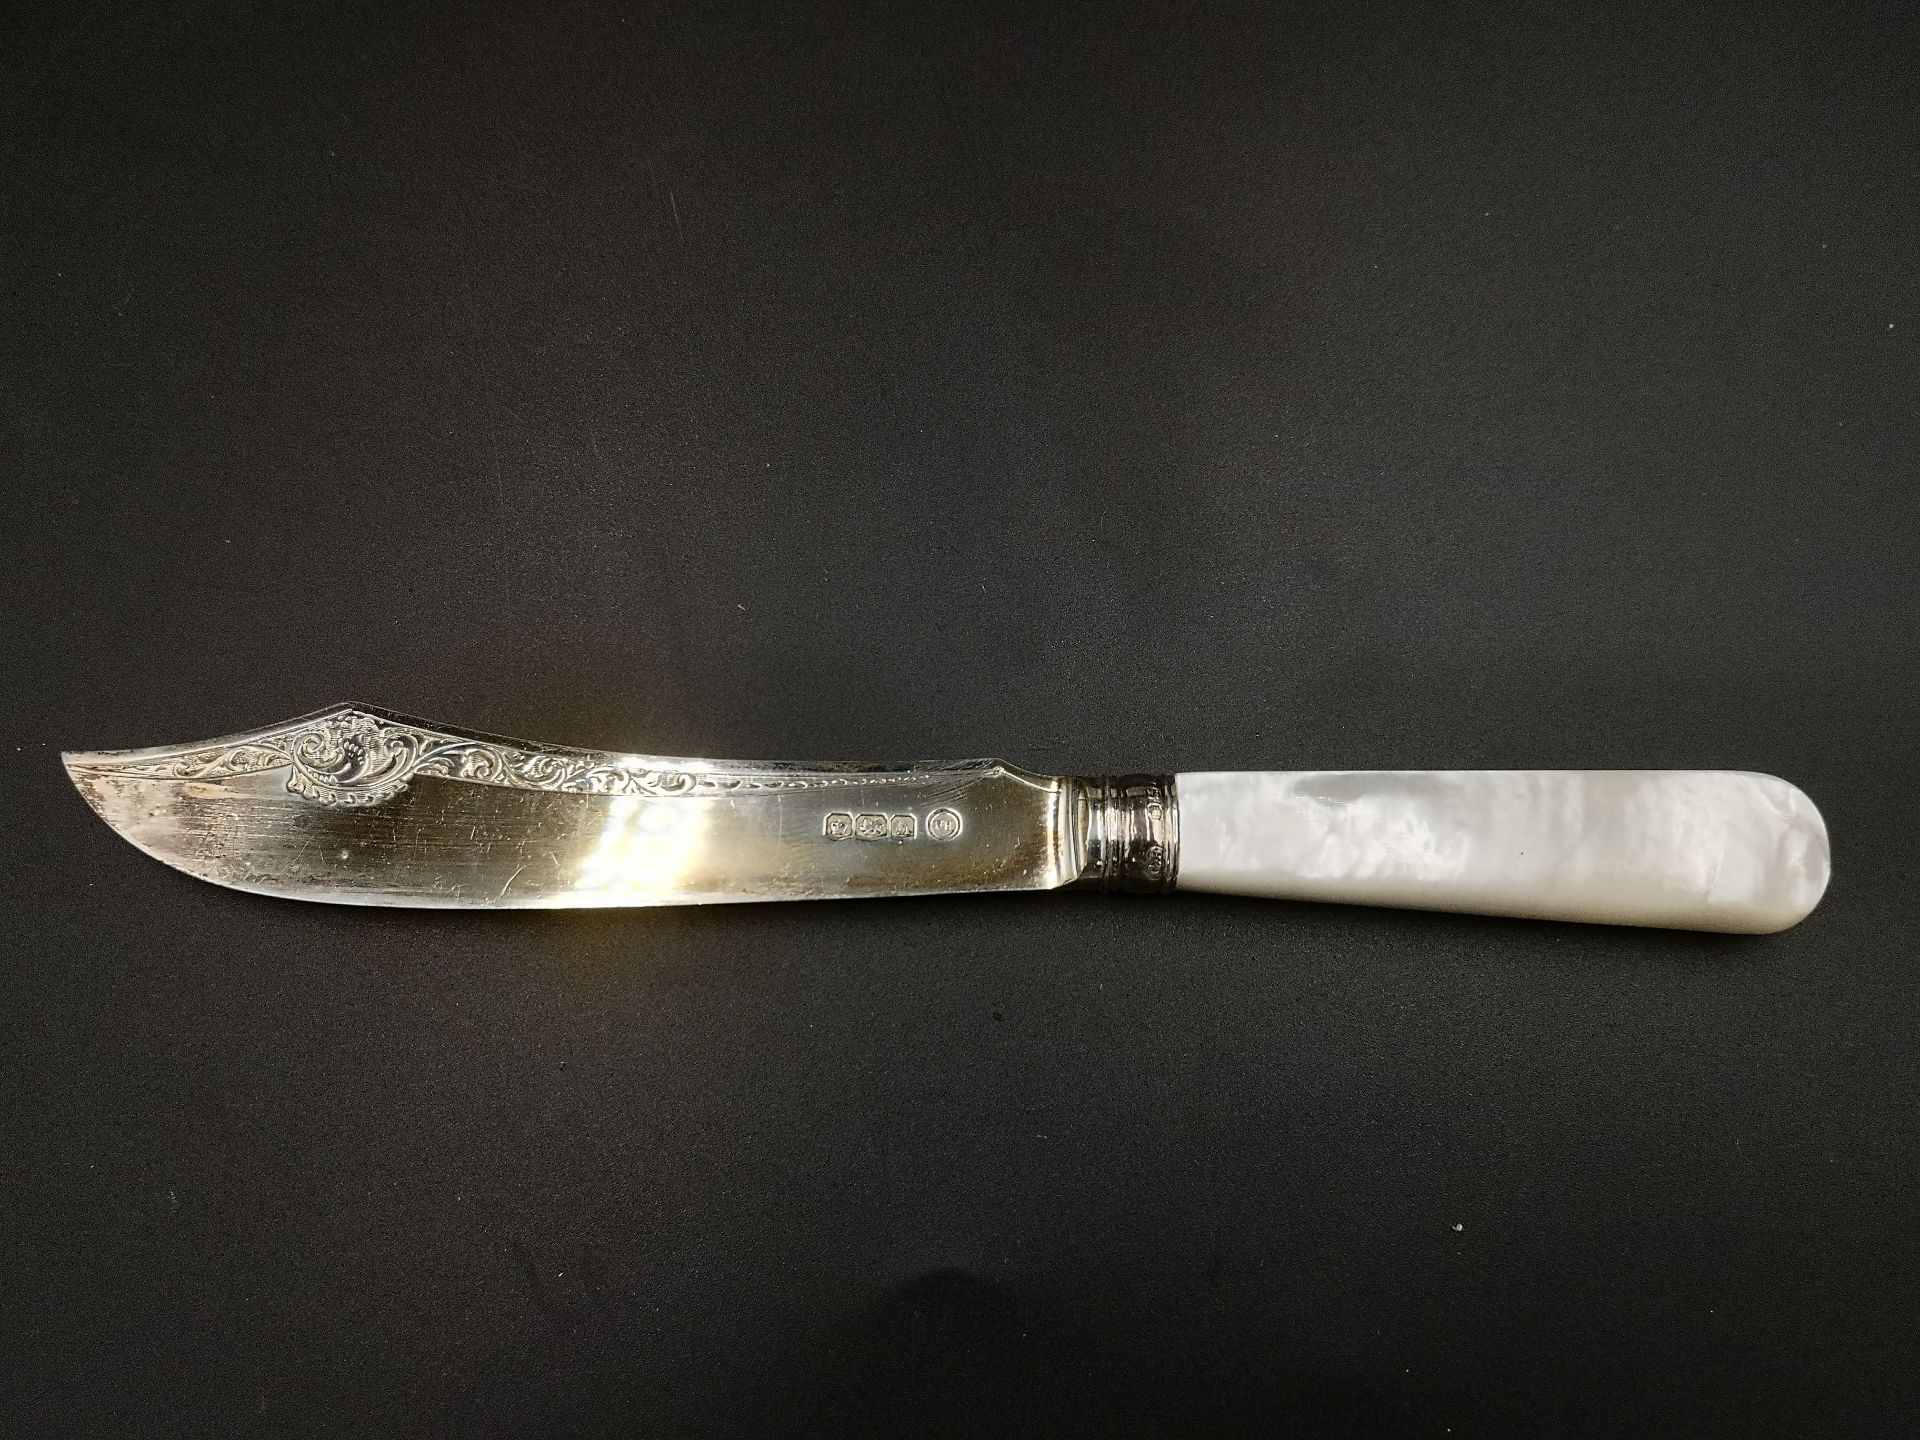 Canteen of silver and mother of pearl fish knives and forks - Image 6 of 6